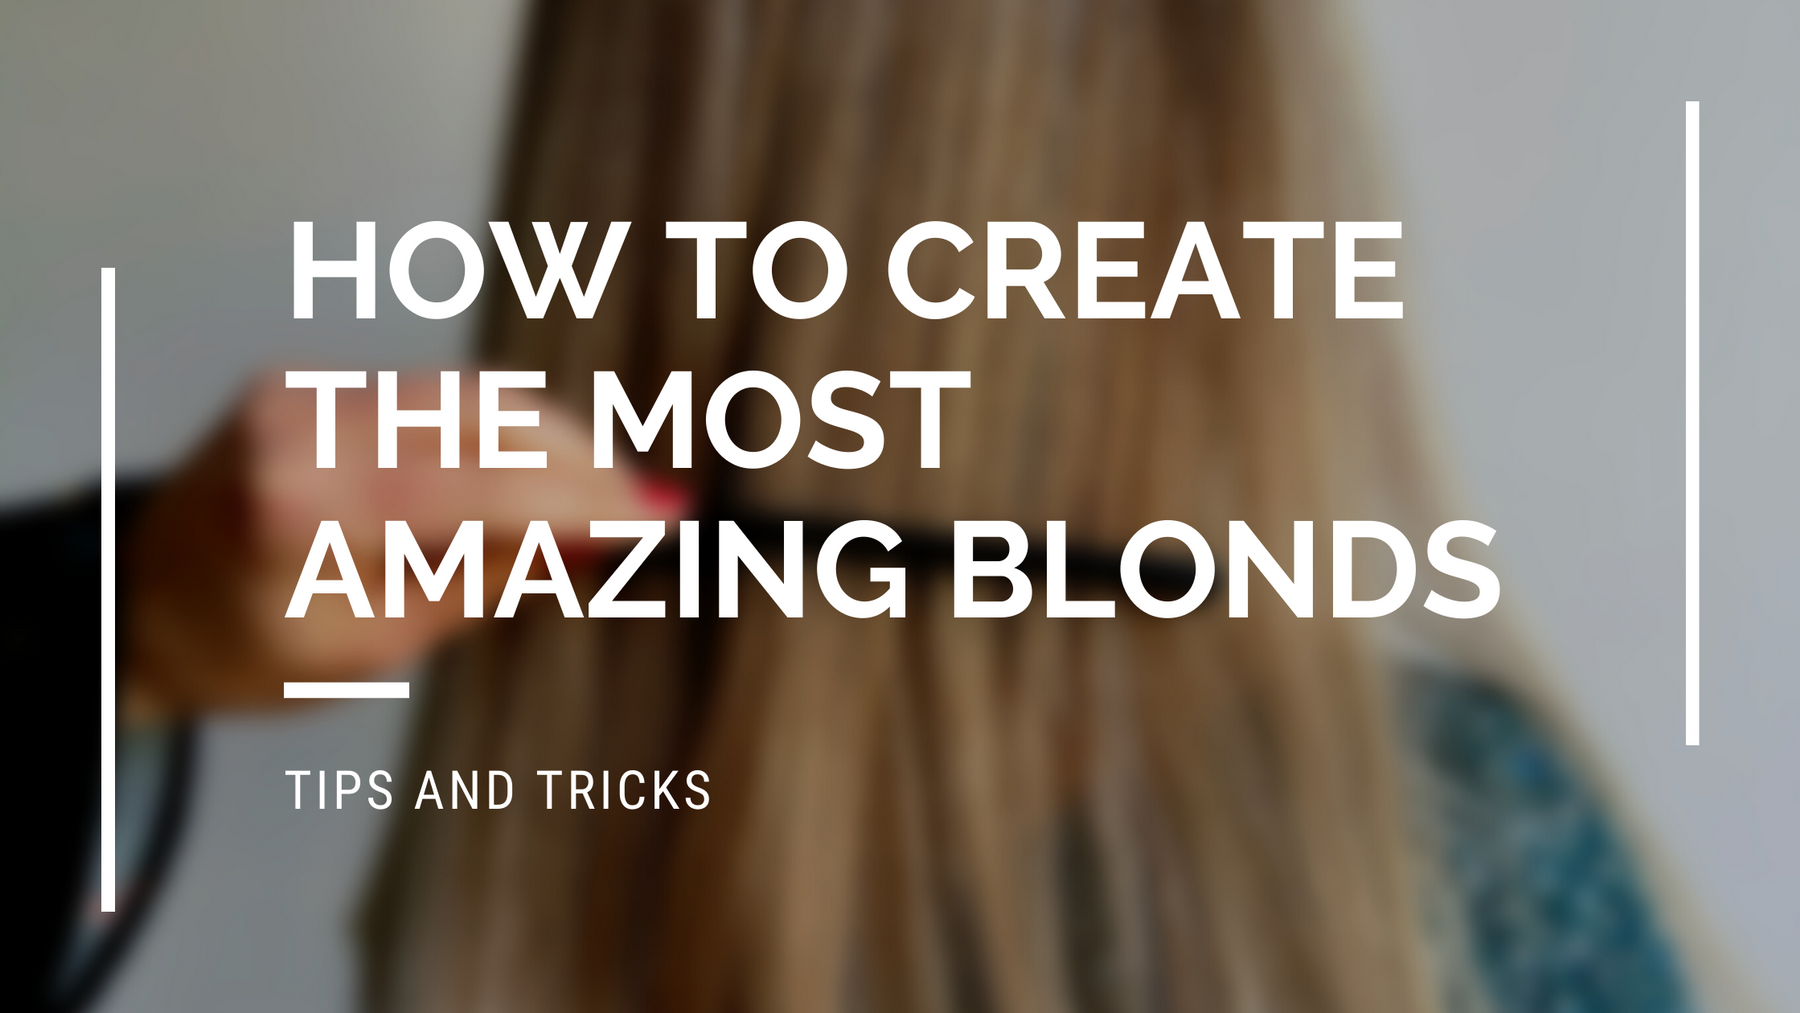 How To Create the Most Amazing Blonde?